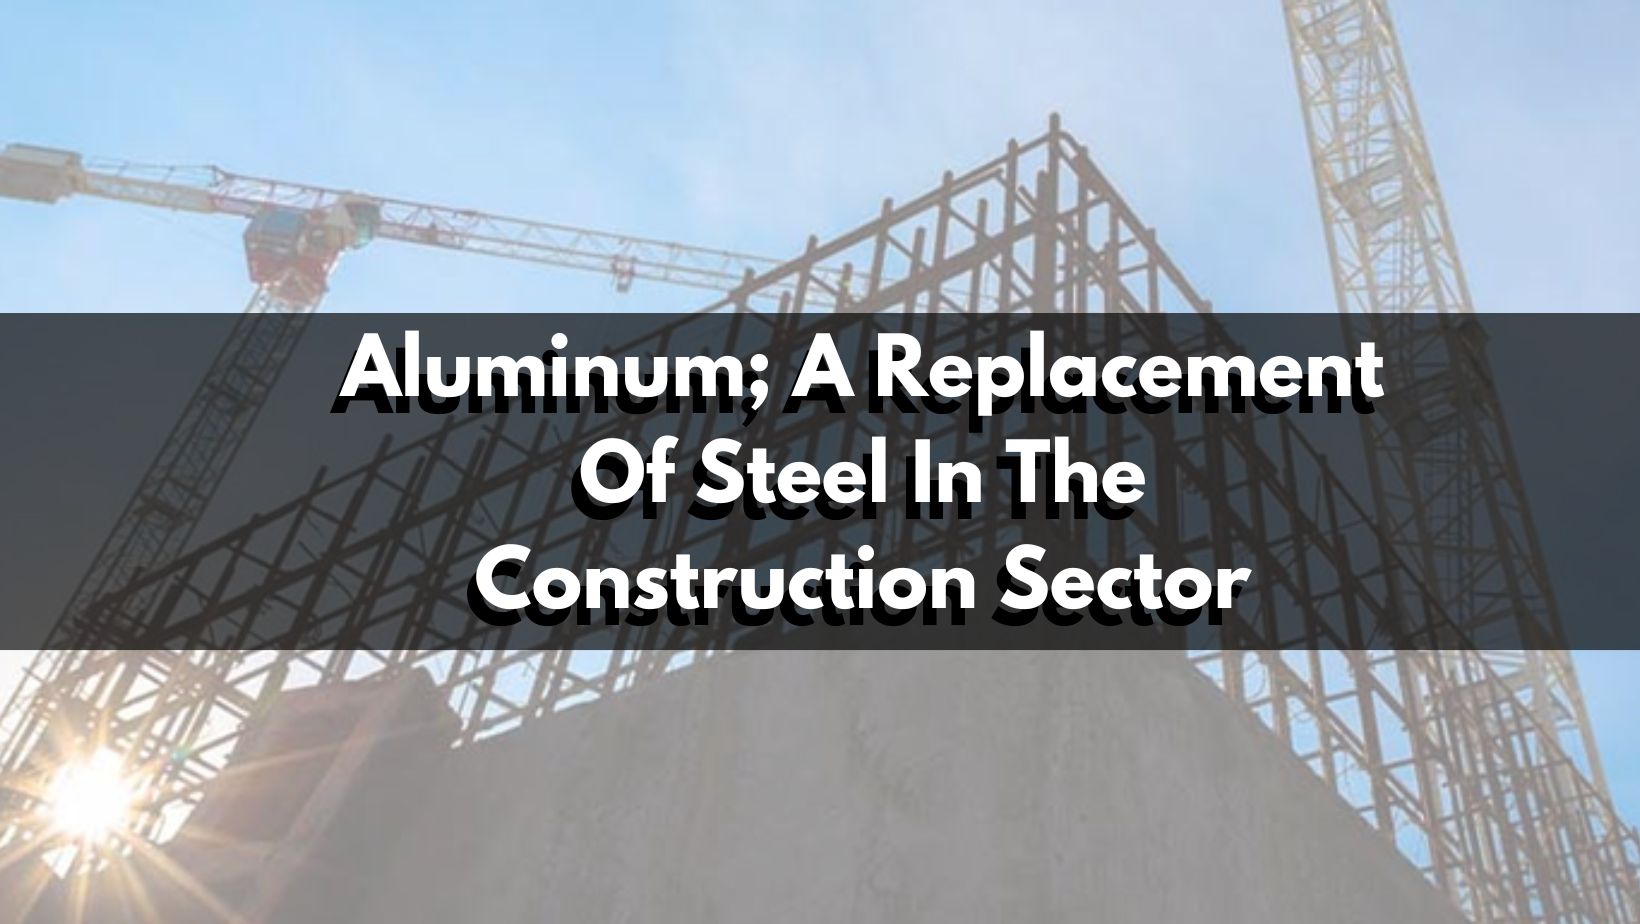 Total replacement of steel by aluminum in the construction sector